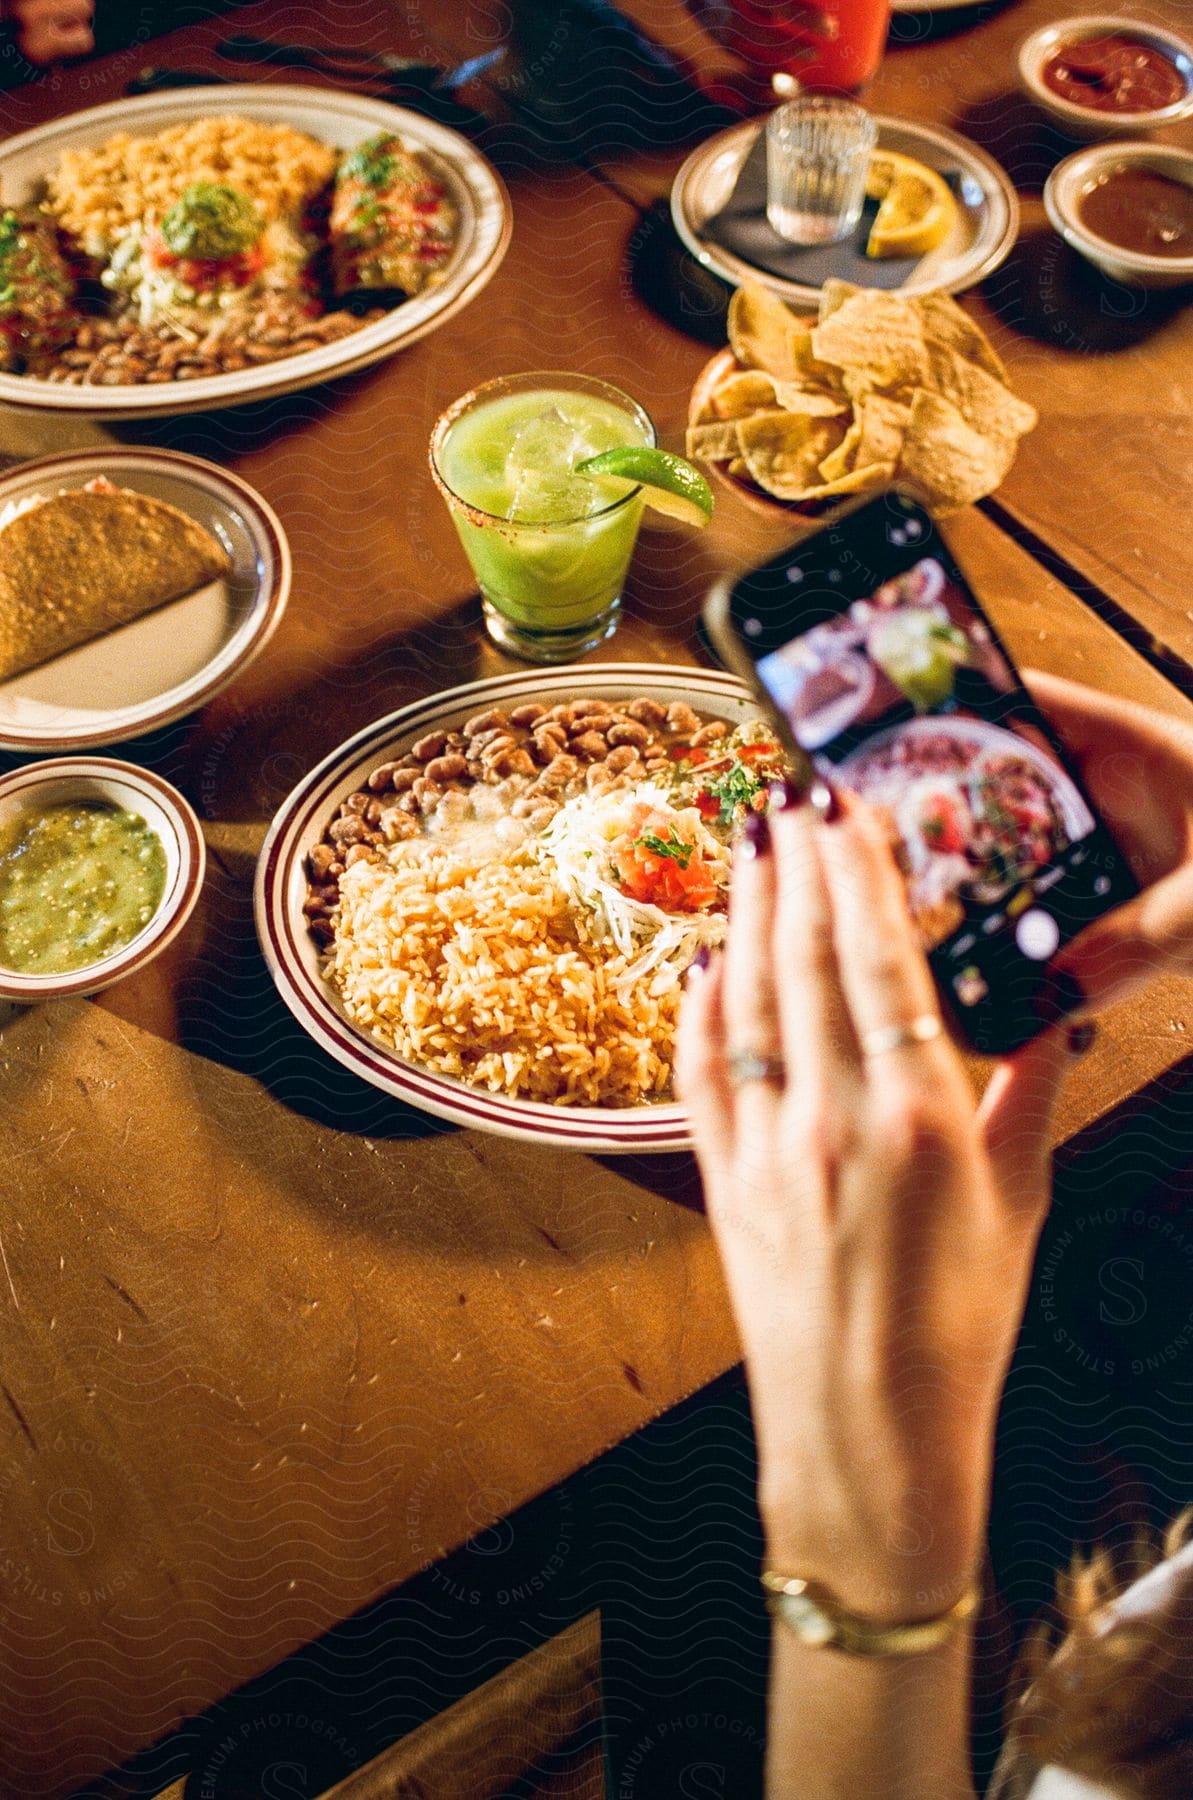 A woman taking a photo of an Indian dish including rice and beans.